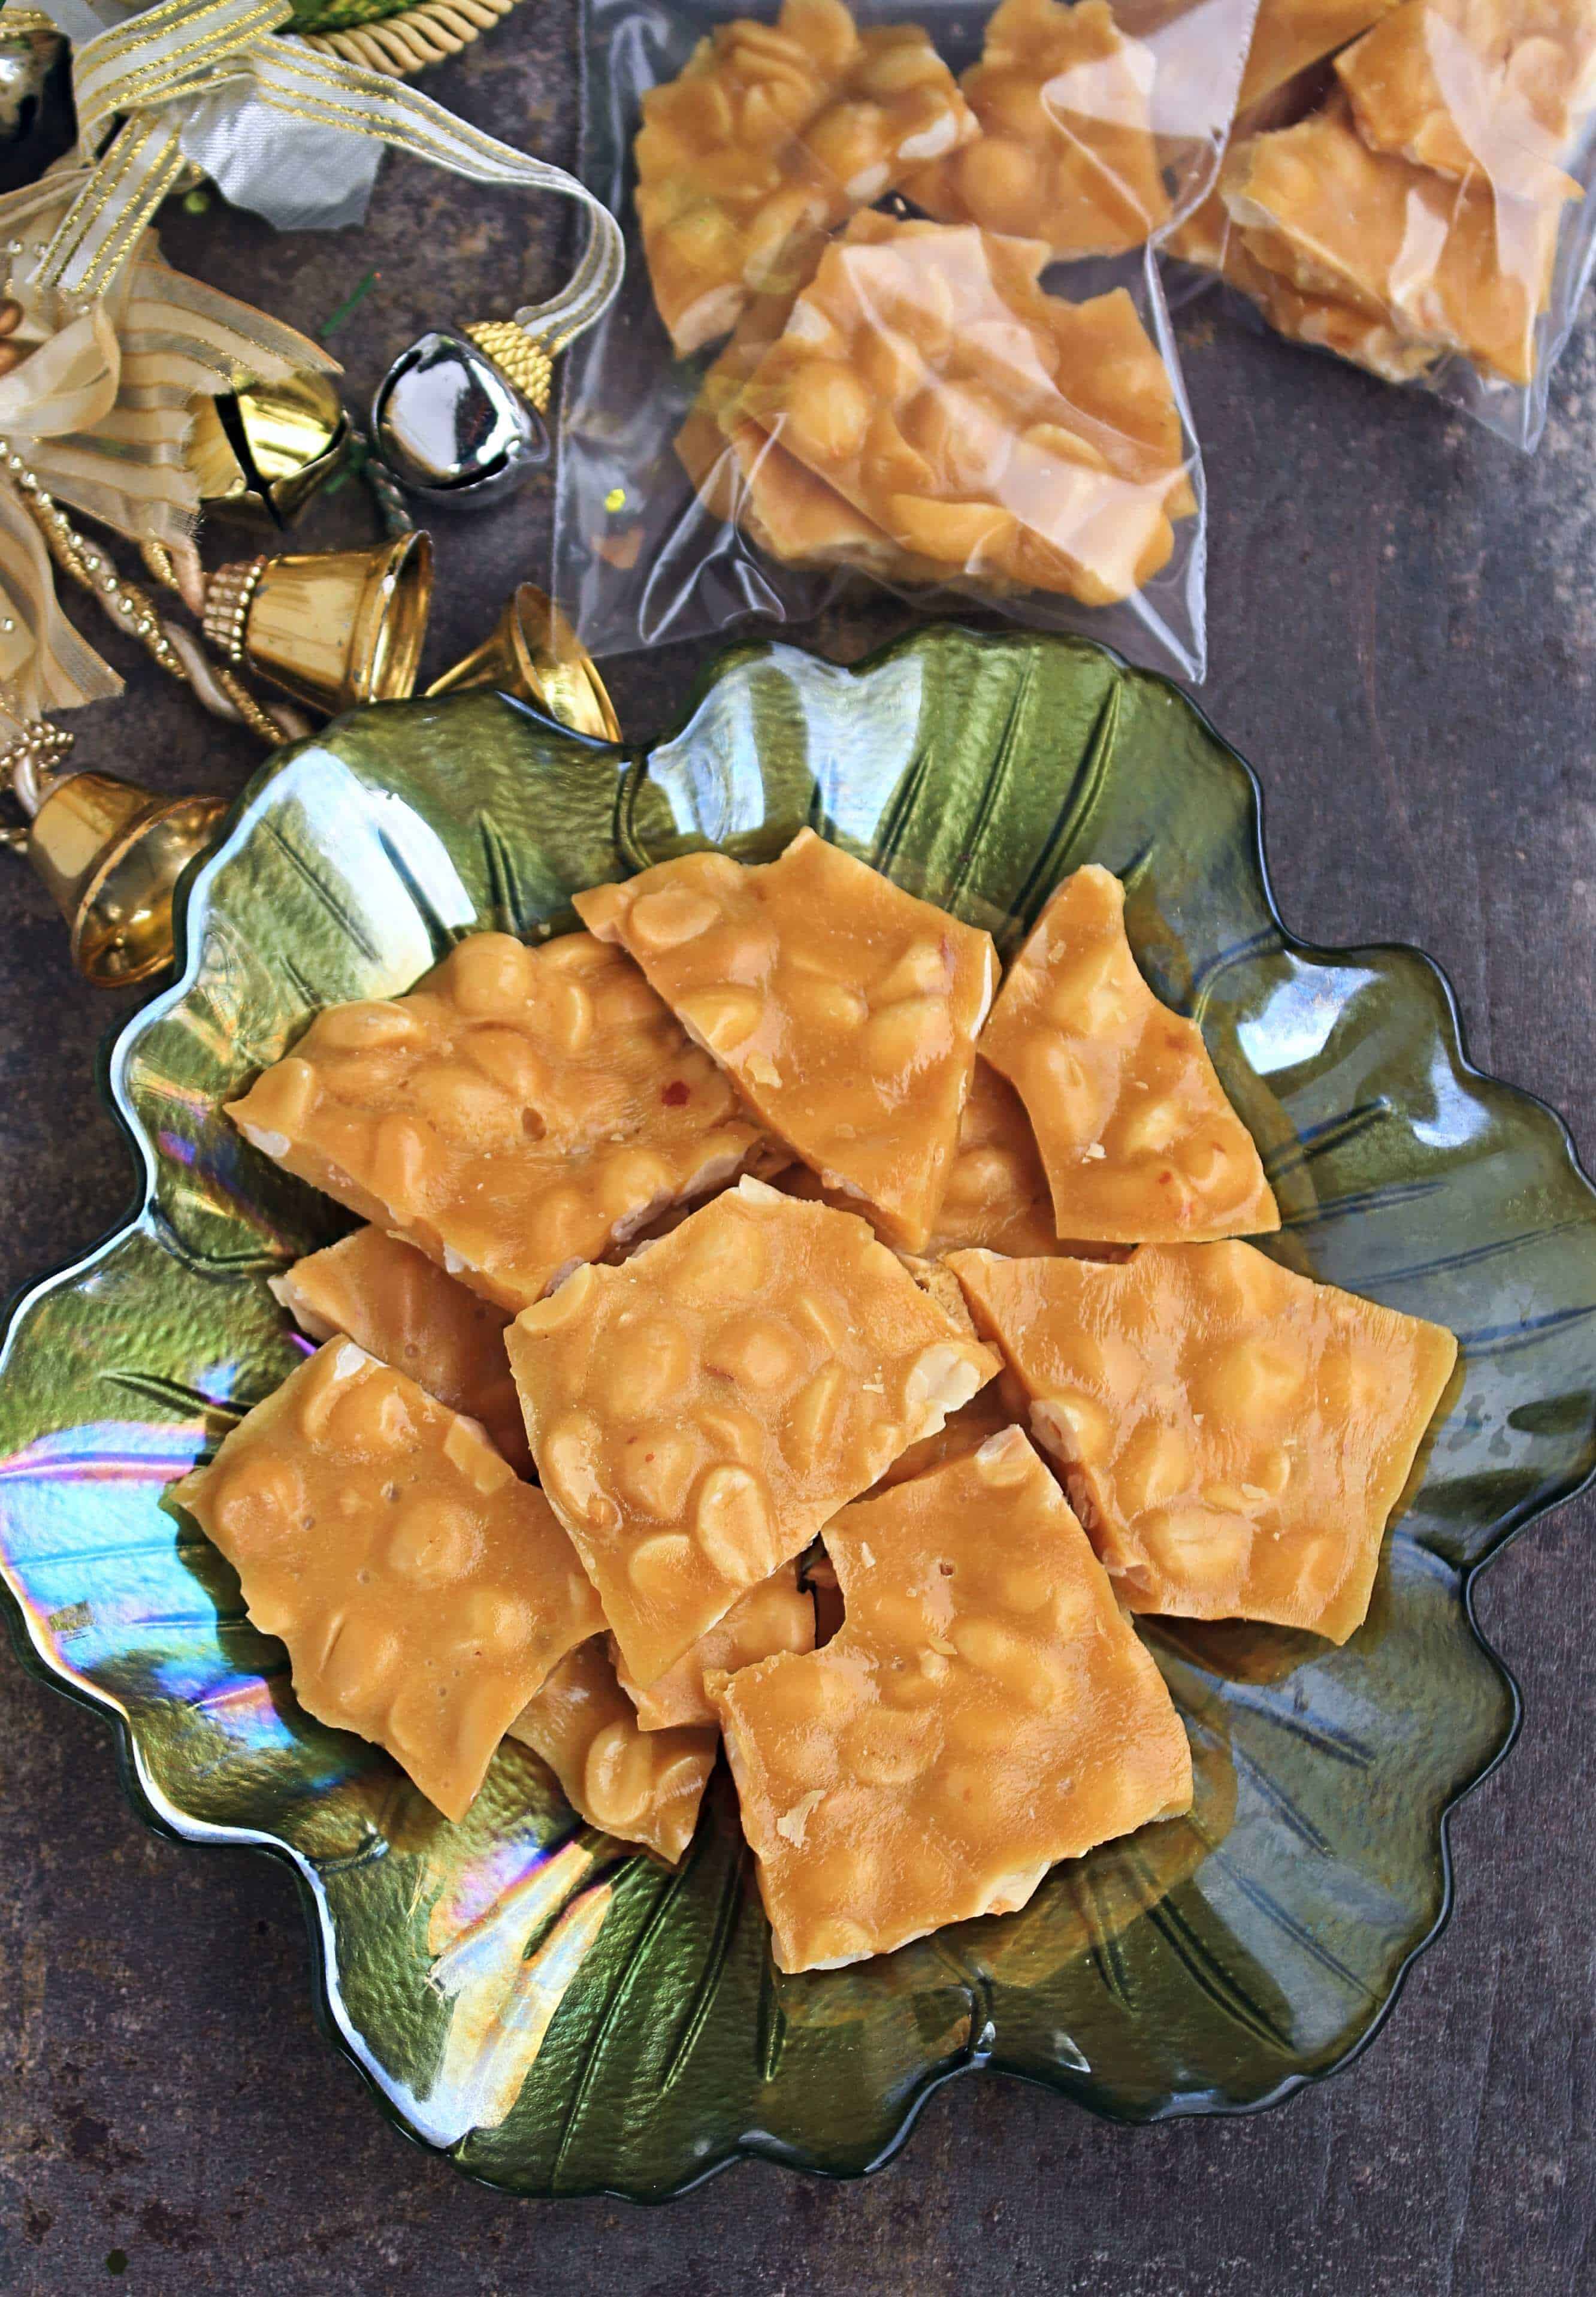 Old Fashioned Peanut Brittle in a decorative plate and some in zip locks